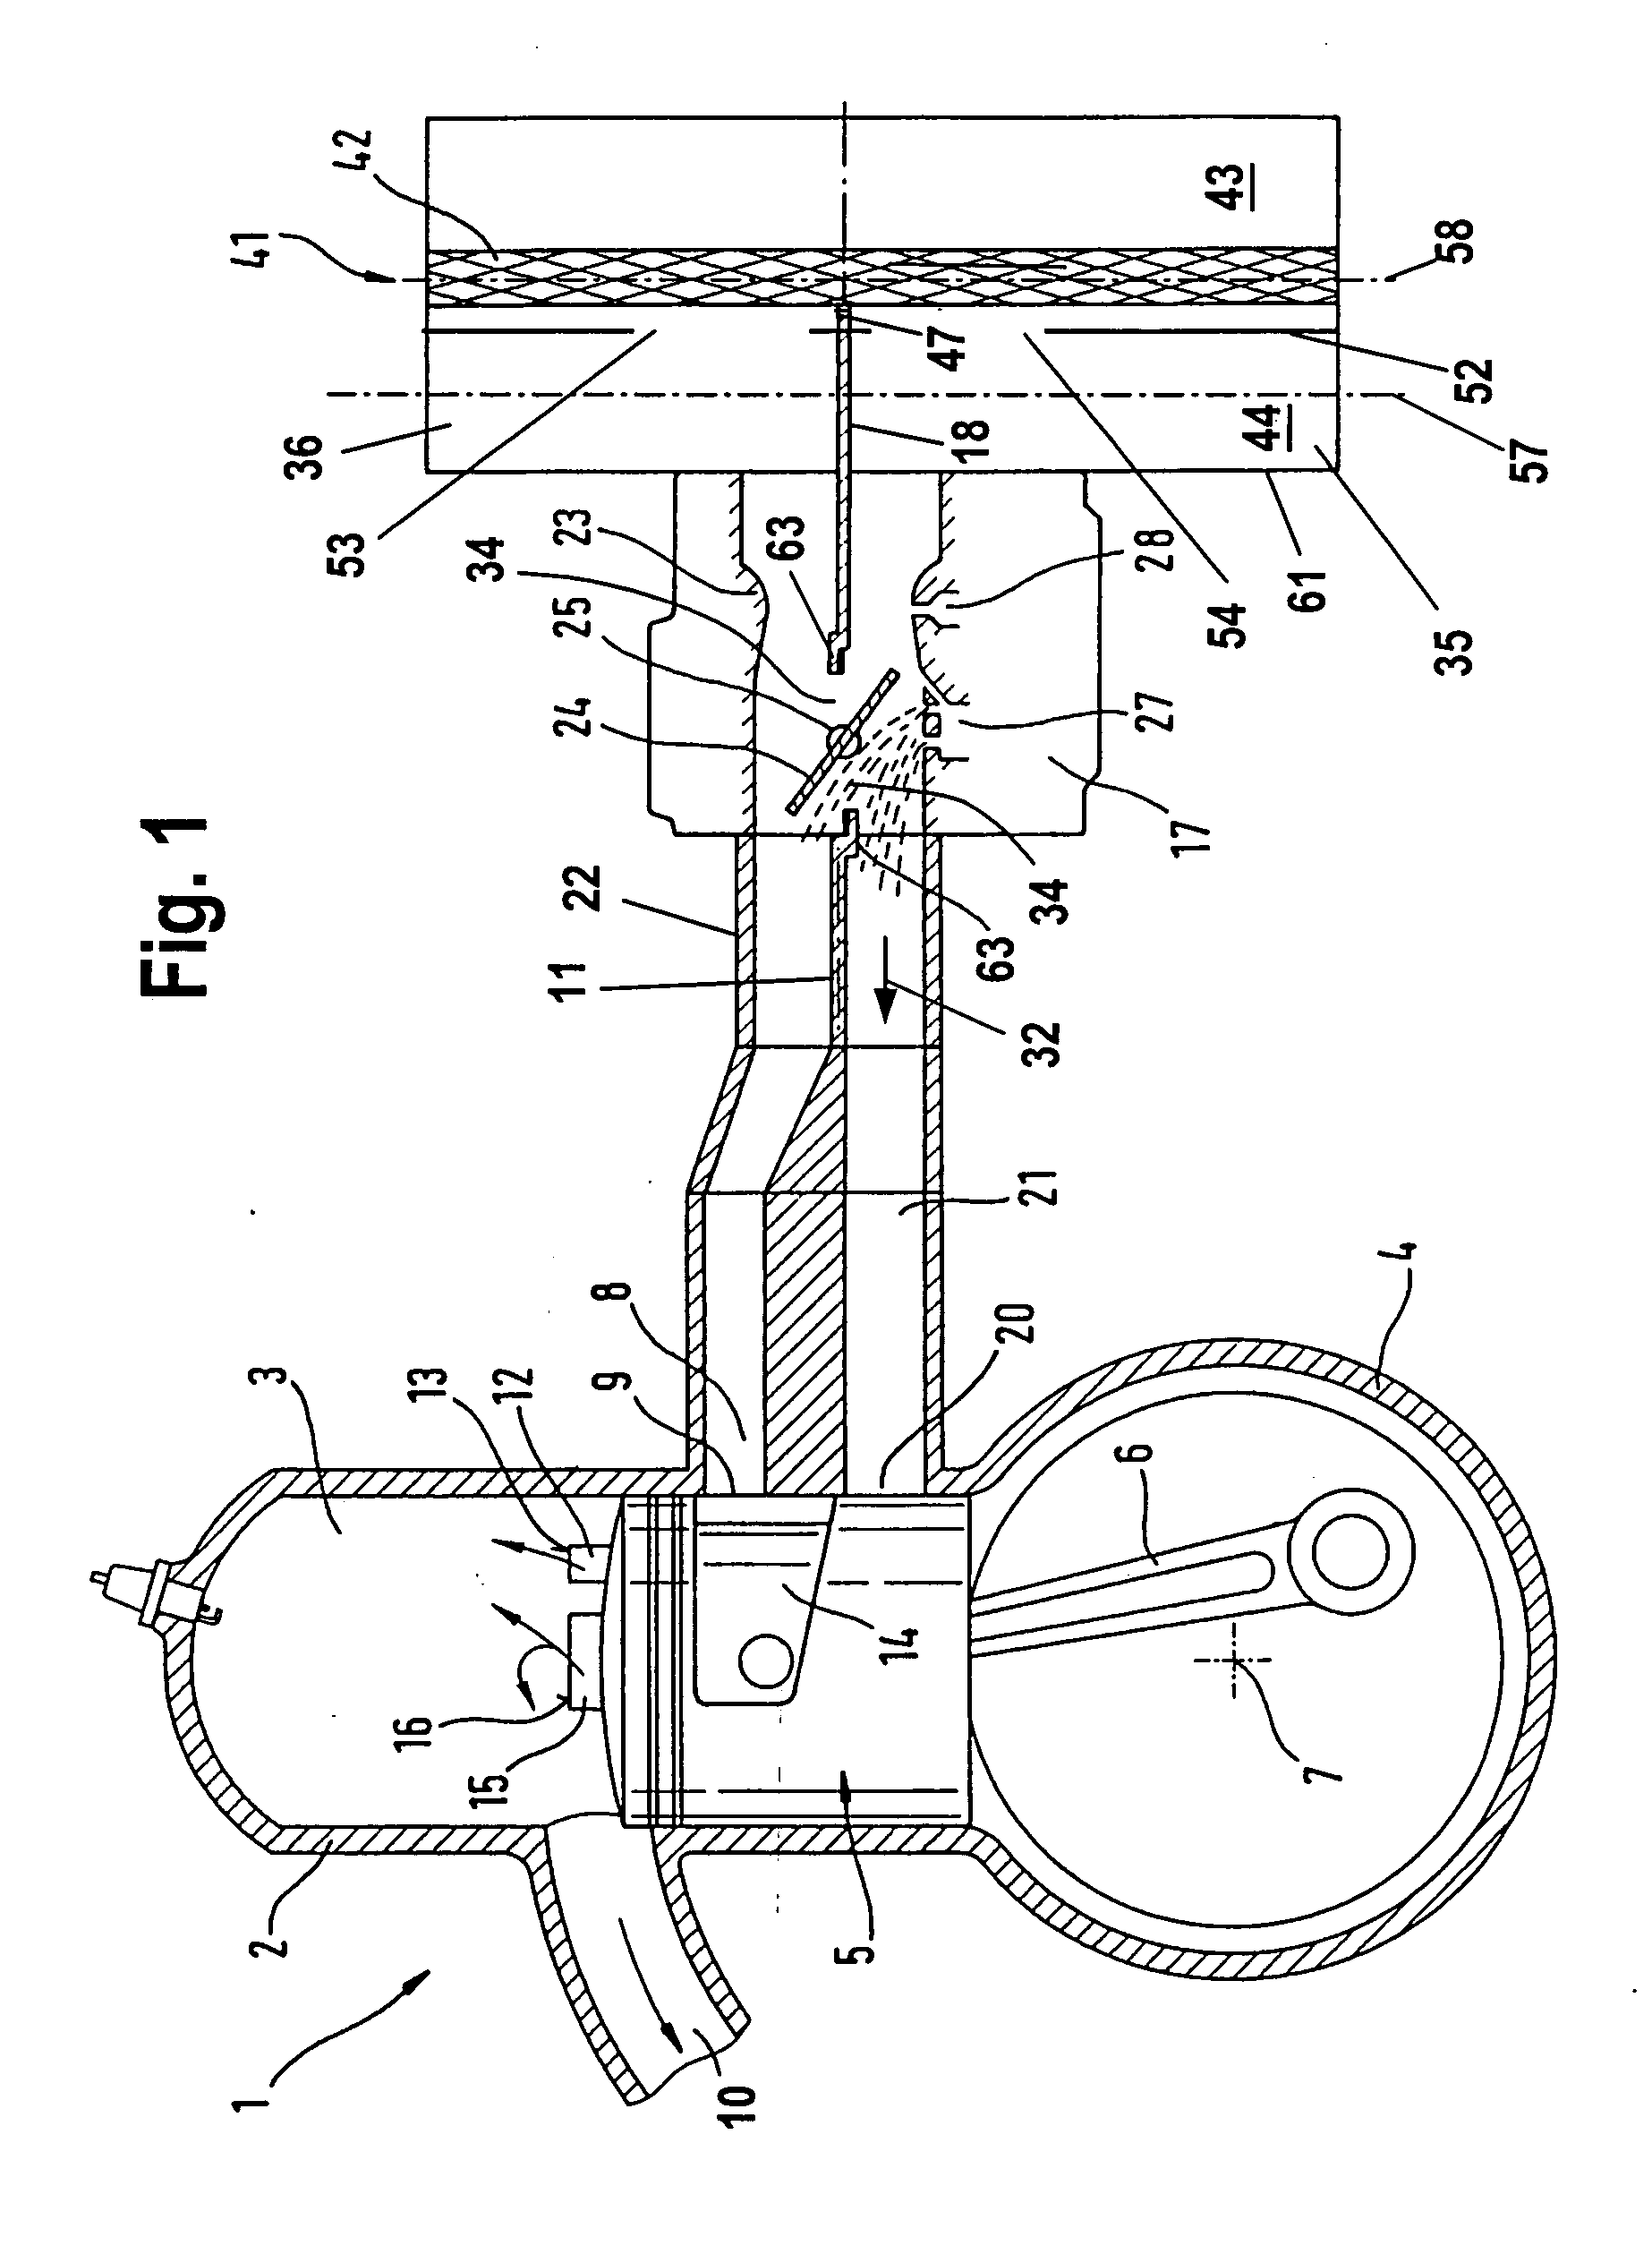 Two-stroke engine assembly